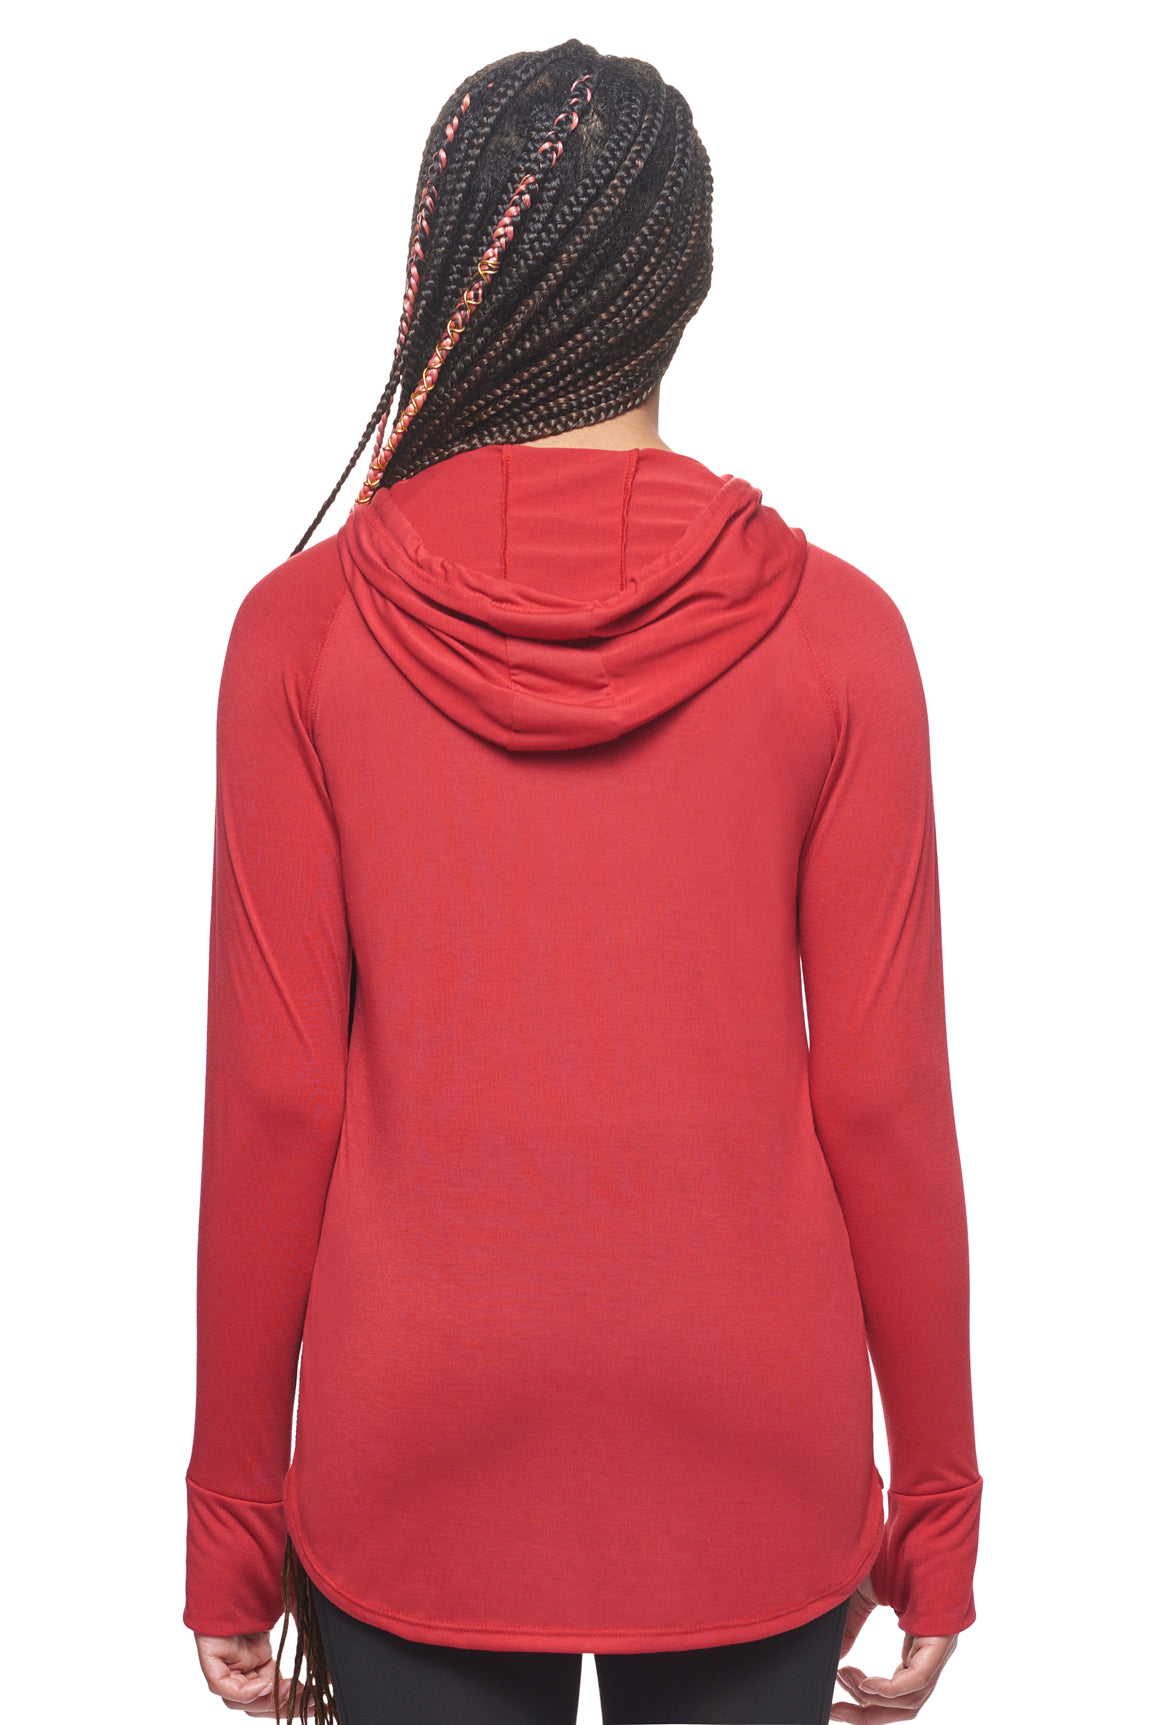 Expert Brand Retail Super Soft Eco-Friendly Performance Apparel Fashion Sportswear Women's Hoodie Long Sleeve Shirt Made in USA scarlet red 3#color_scarlet